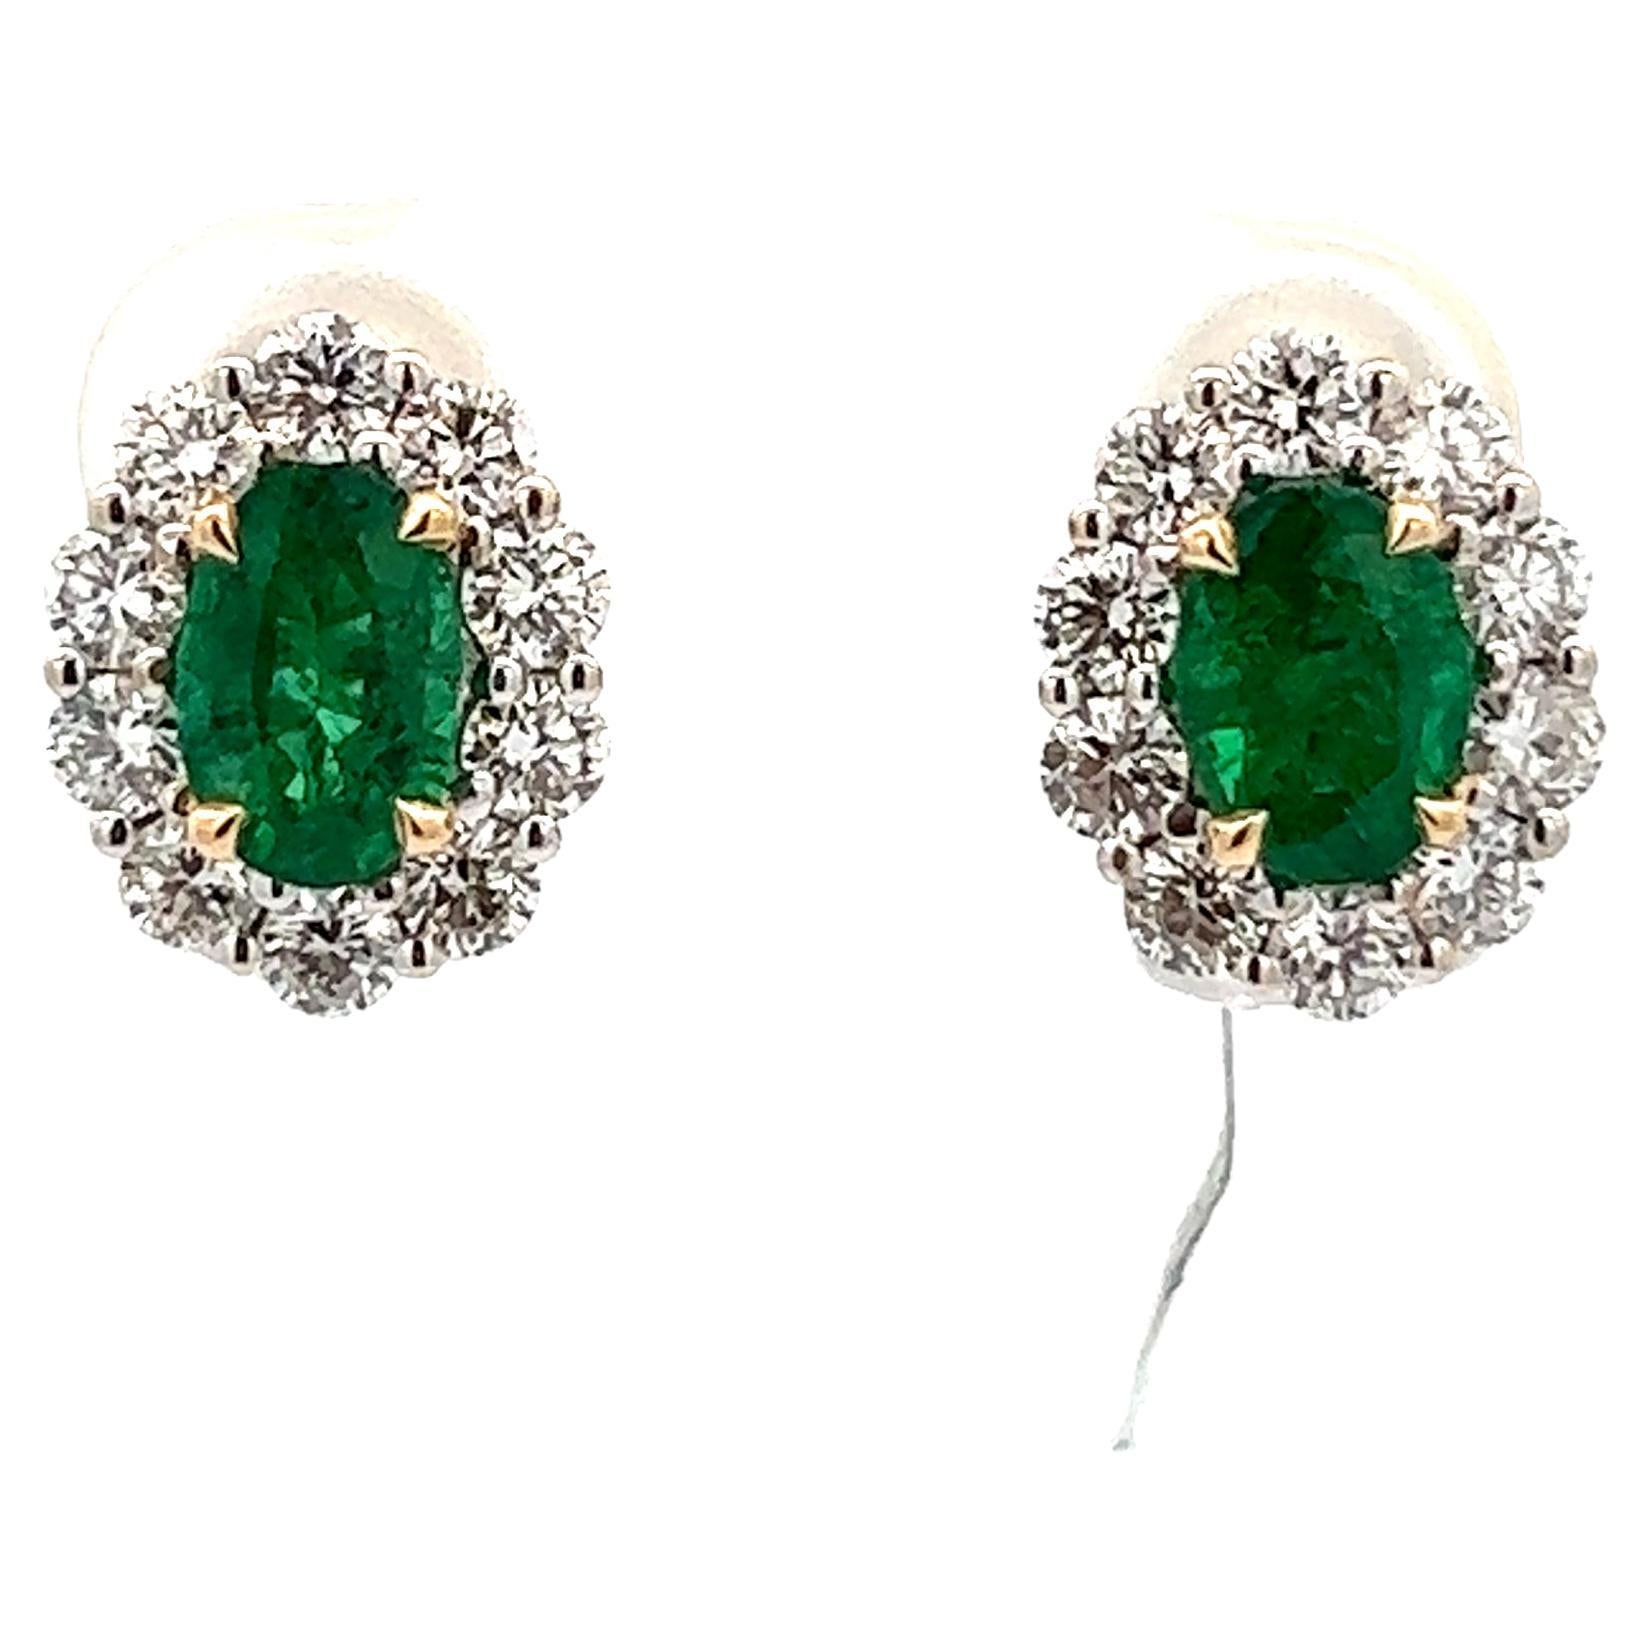 Stunning Emerald and Diamonds Earrings 18KW gold settings.
VS2-S1 Clarity
GH color 

1.39ct Emerald
1.28ct Diamonds

Total 2.67ct